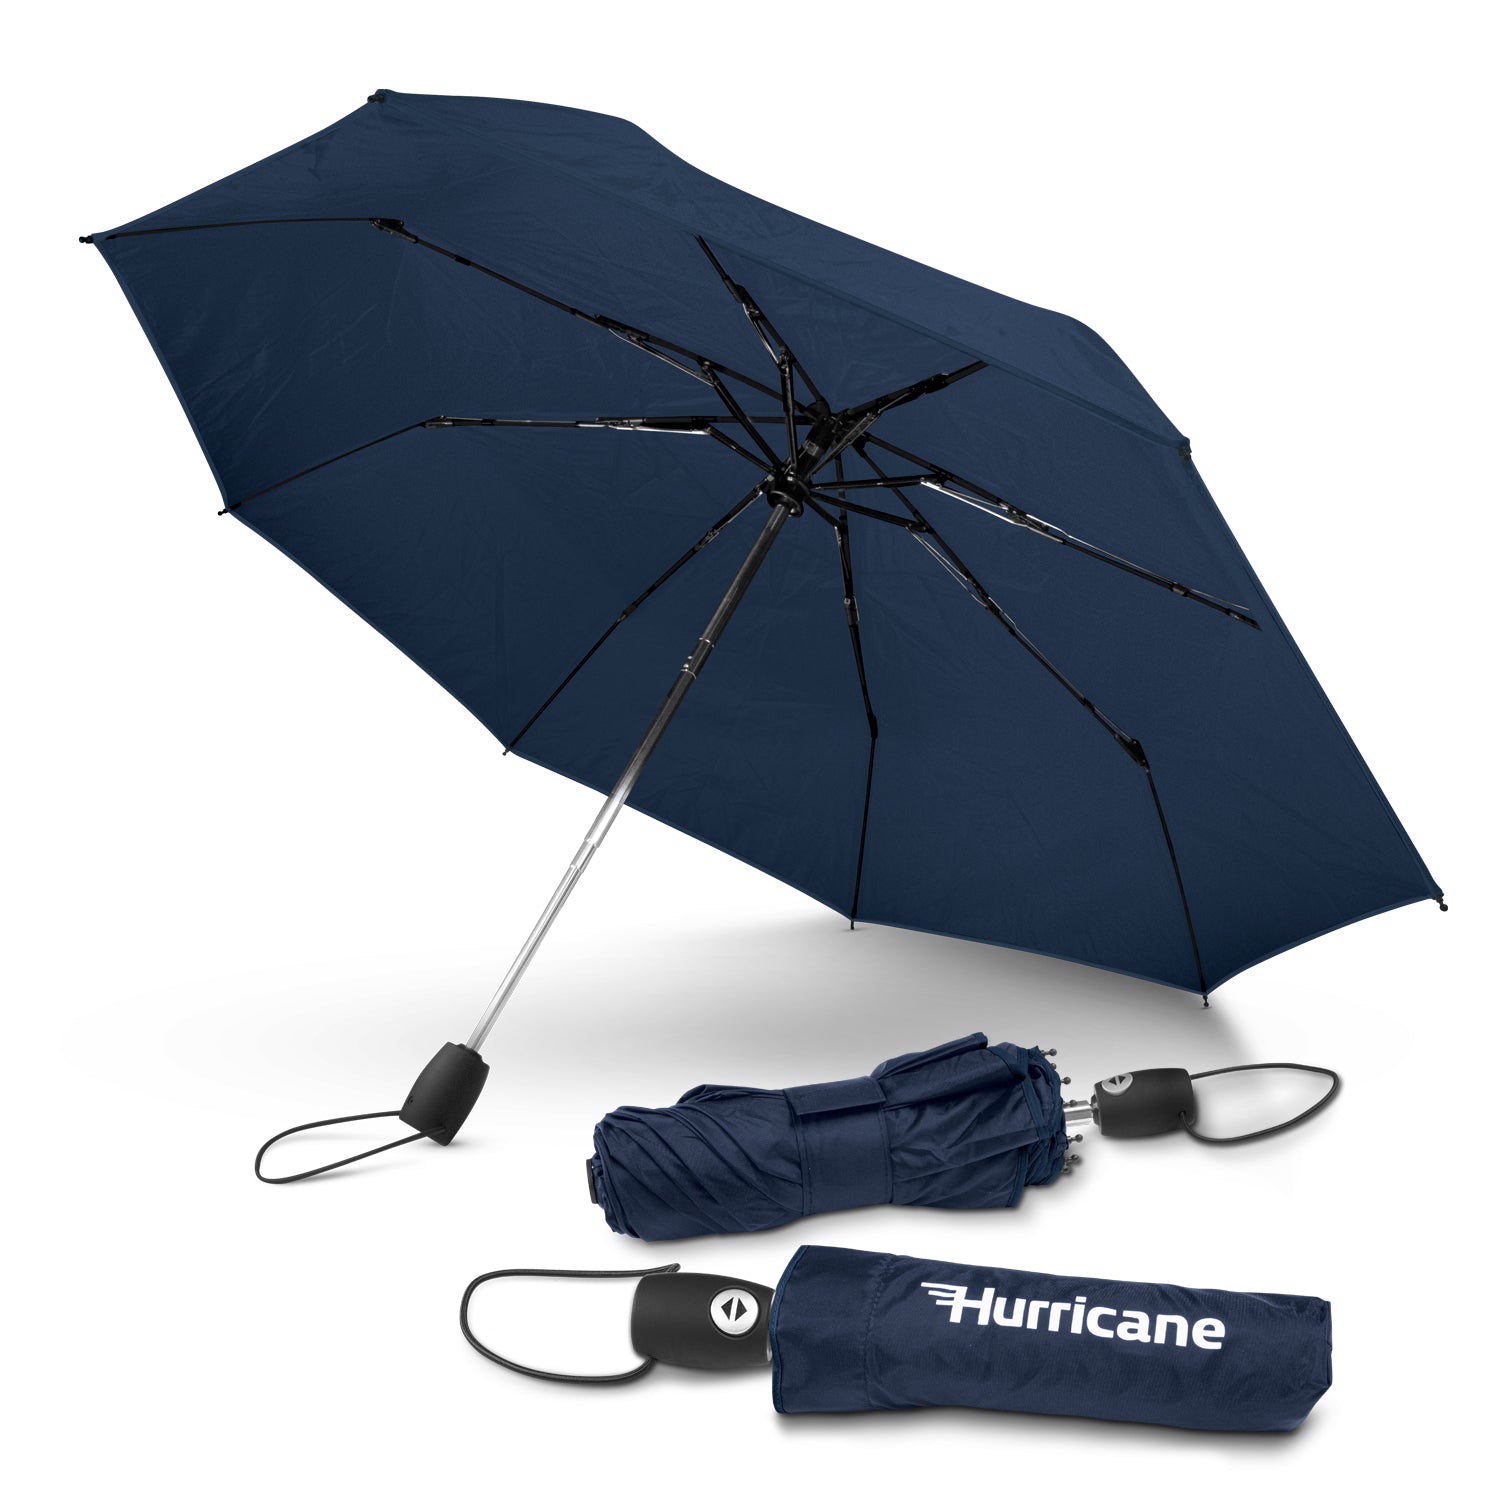 HURRICANE-COMPACT_-Heavy-Duty-Wind-Rated-Compact-Umbrella-With-Double-Layer-Wind-Vent-System-Fibreglass-Ribs-Navy